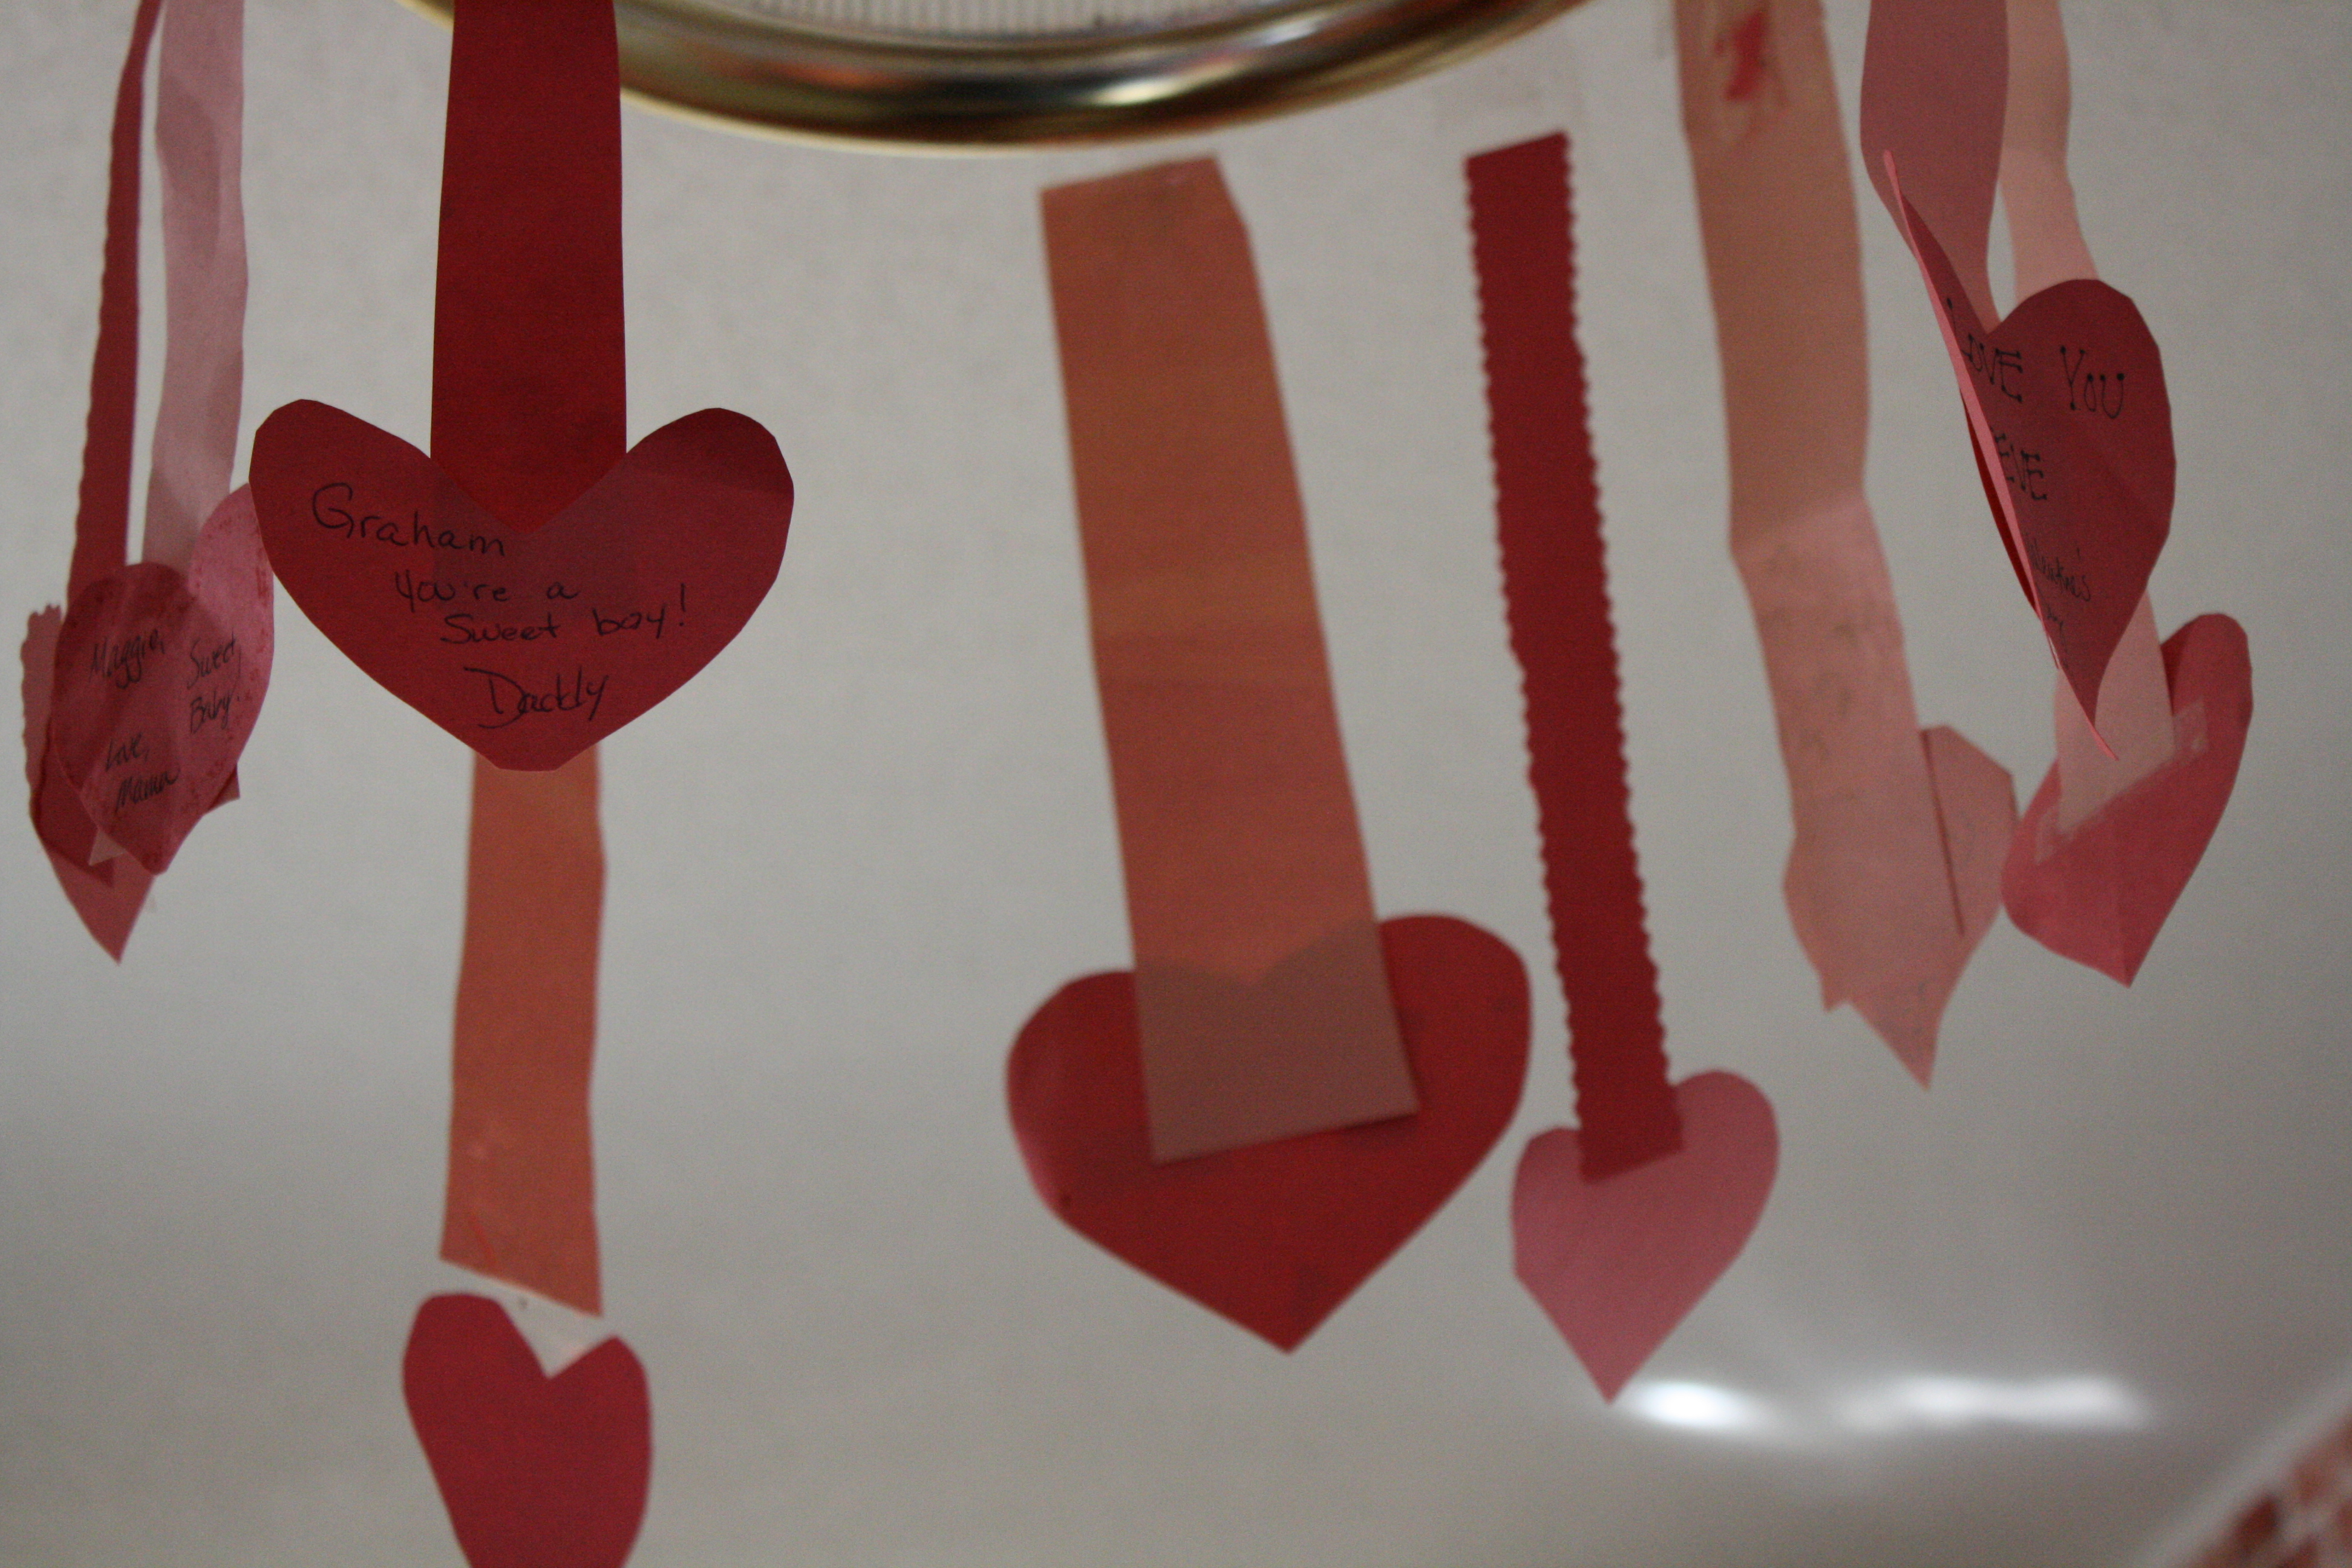 Just simple homemade Valentines. Sugar, hearts and love. I bring you the homemade version of a Valentine homeschool celebration.